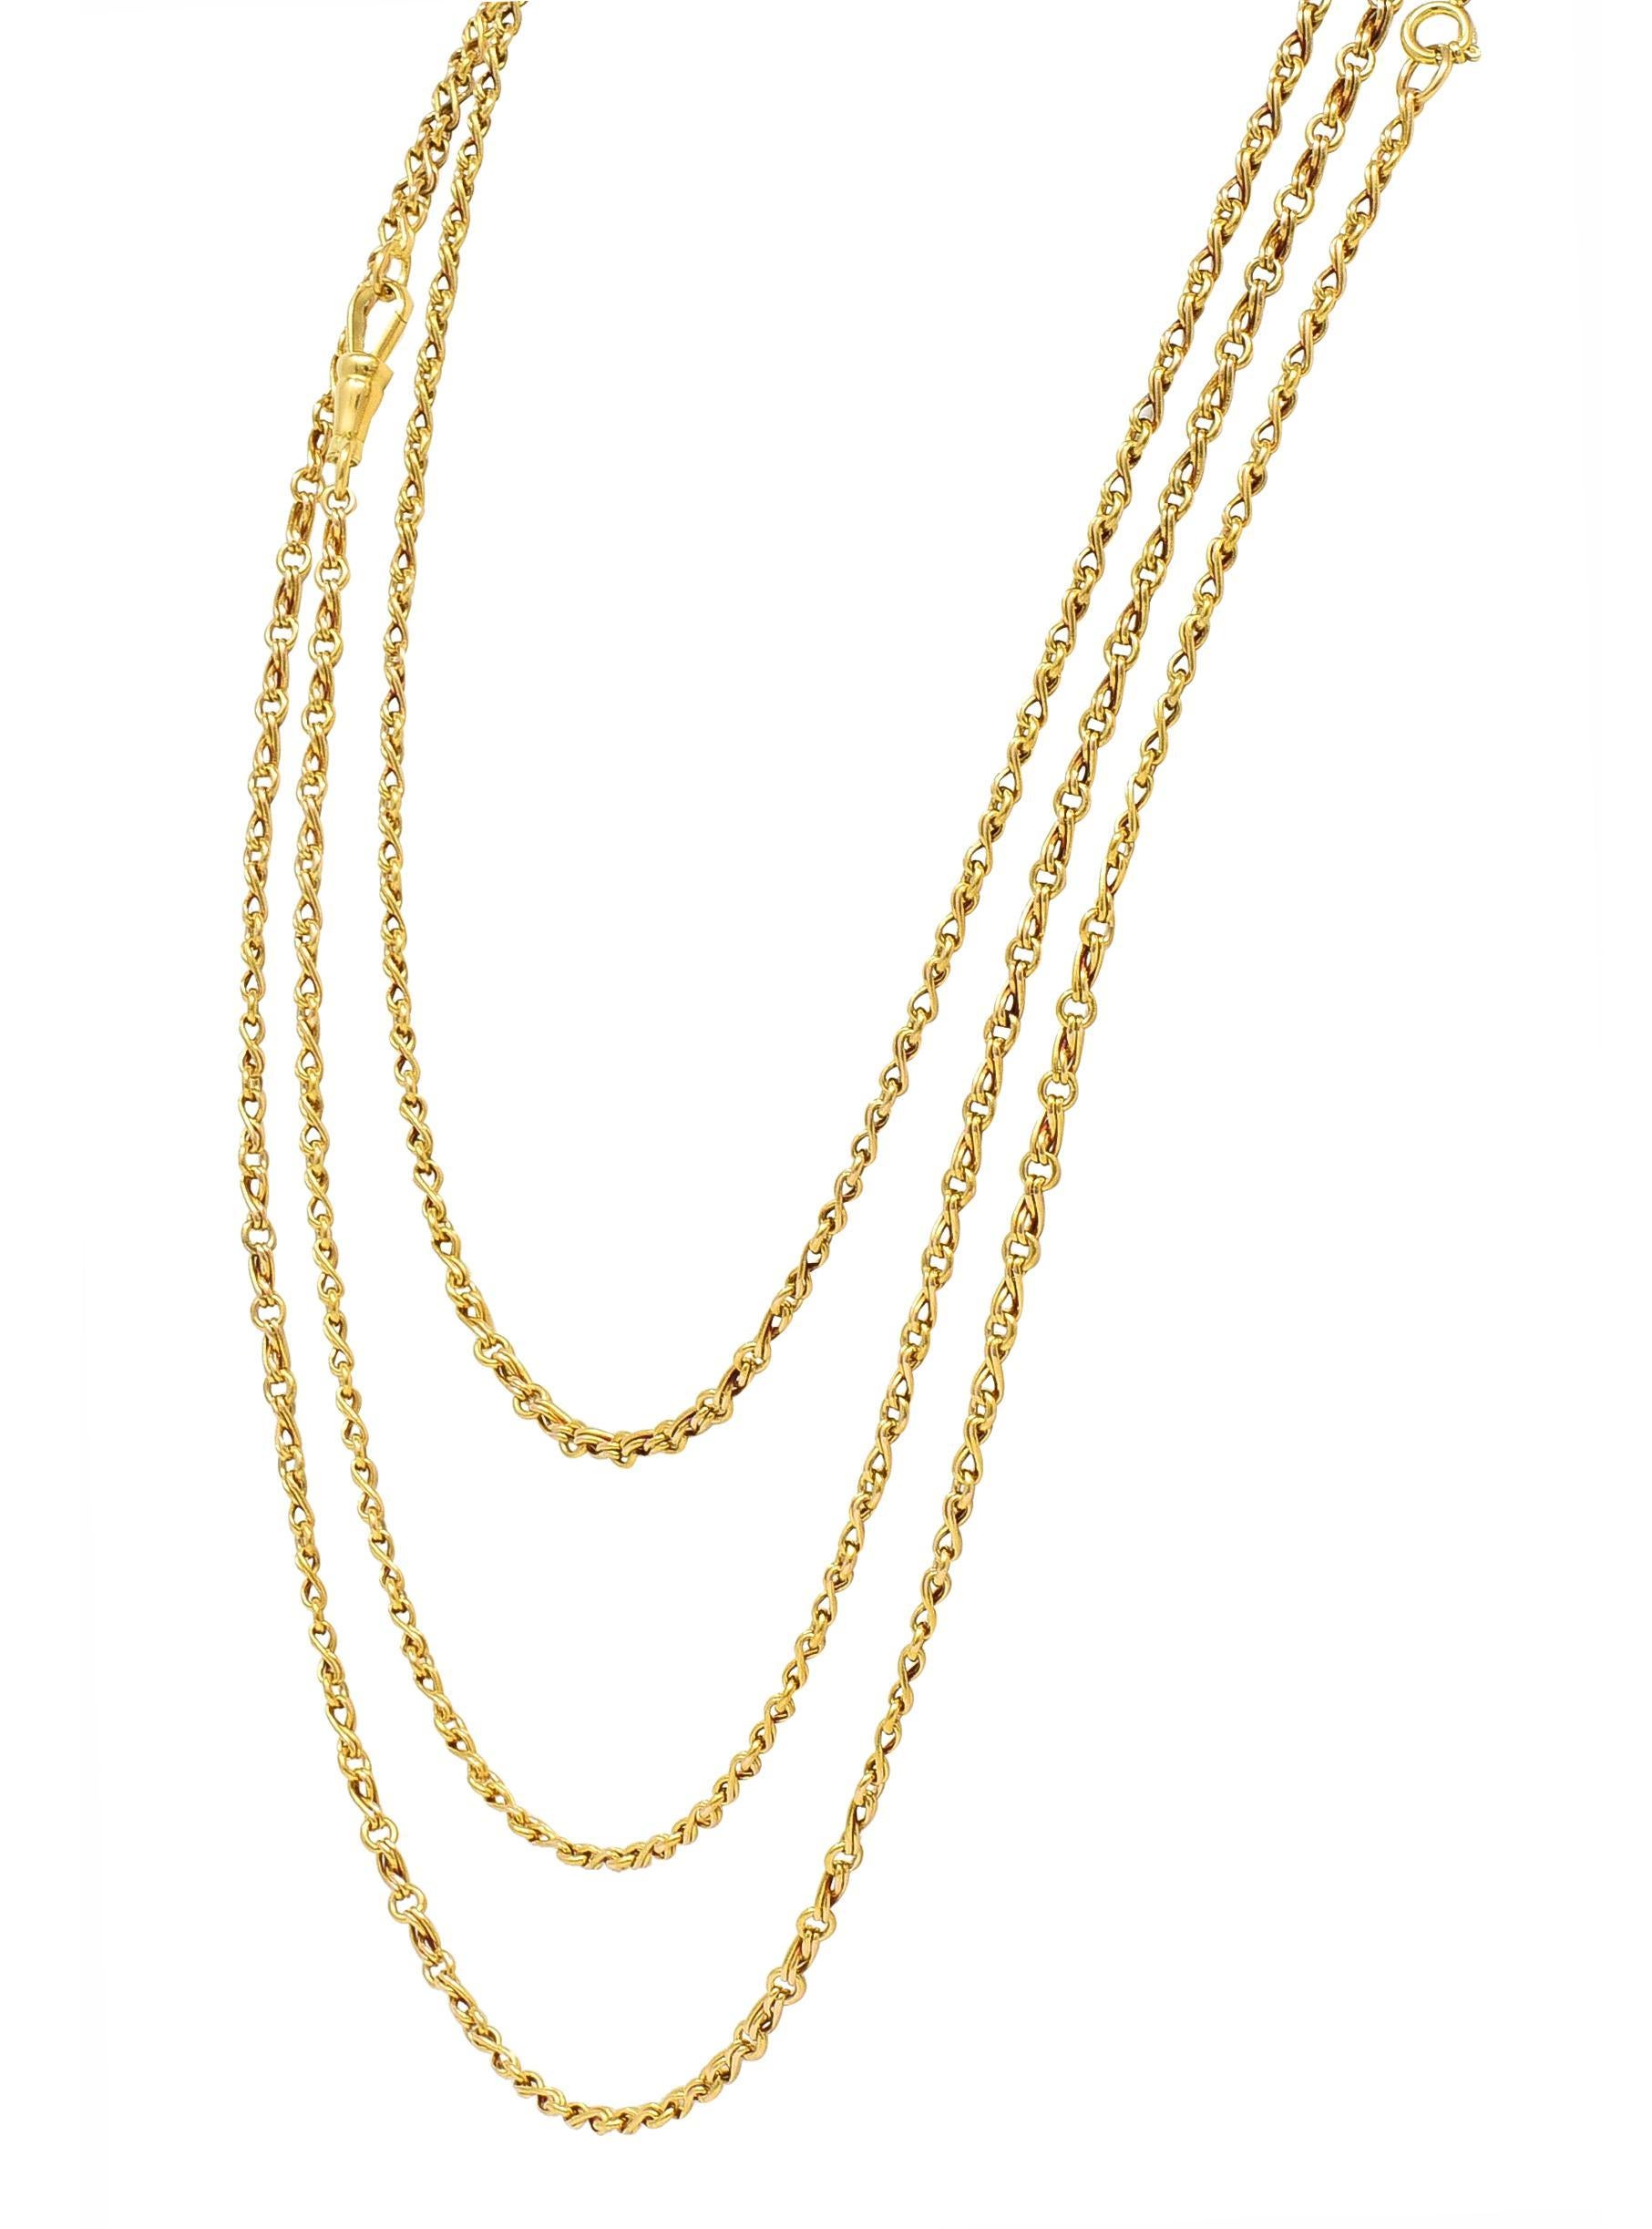 Women's or Men's Victorian 18 Karat Yellow Gold Infinity Link 66.5 IN Long Antique Chain Necklace For Sale